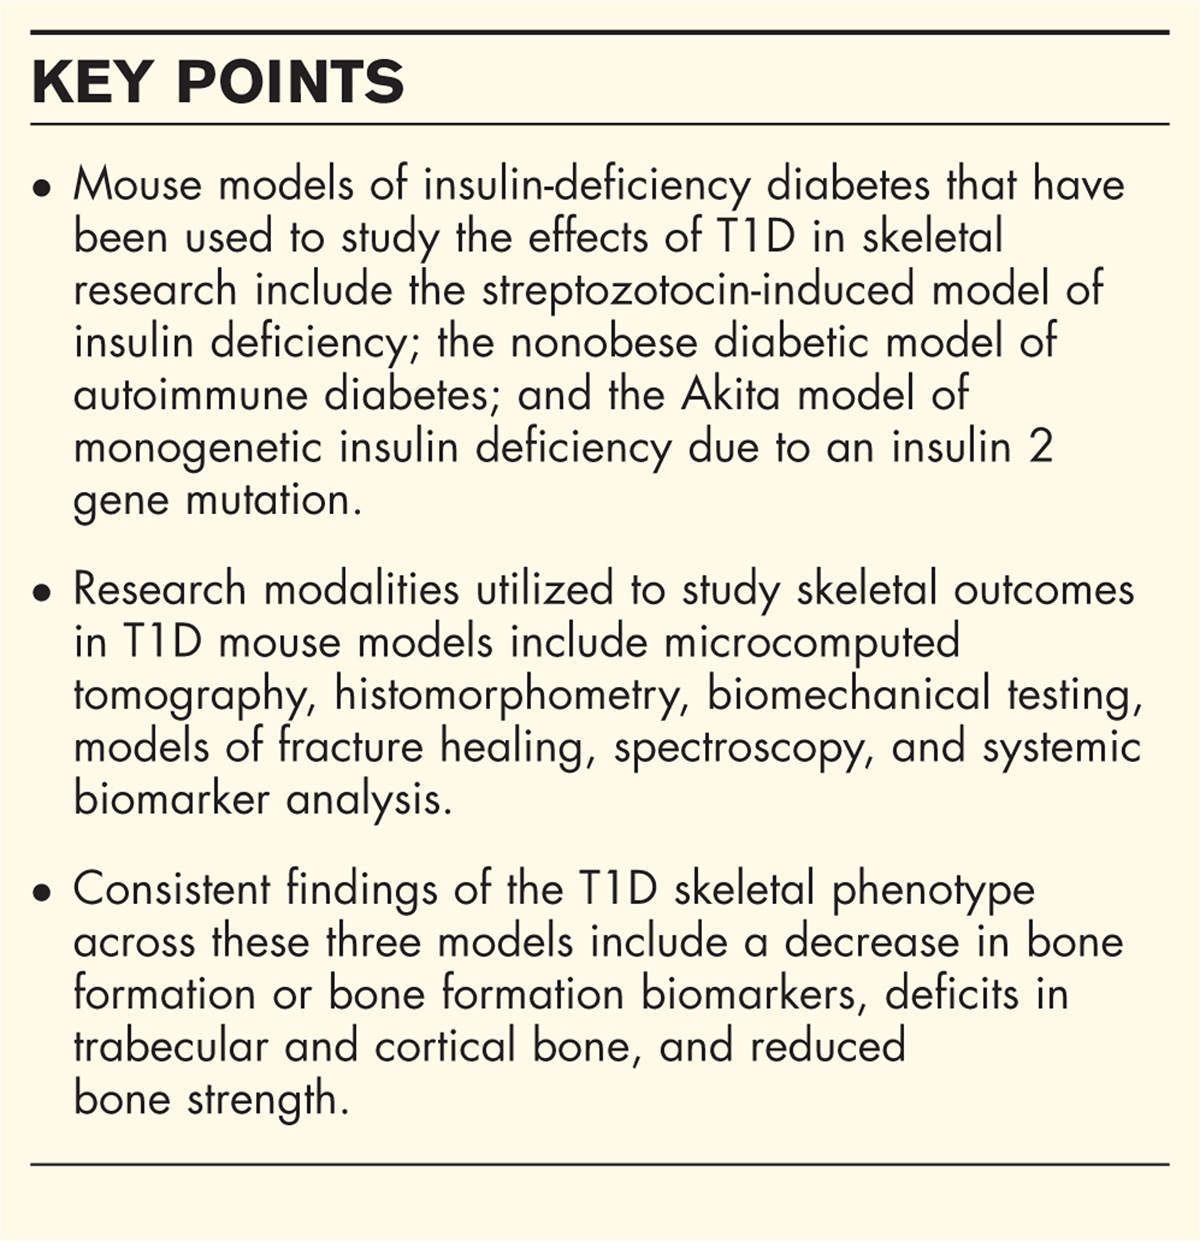 Mouse models of type 1 diabetes and their use in skeletal research